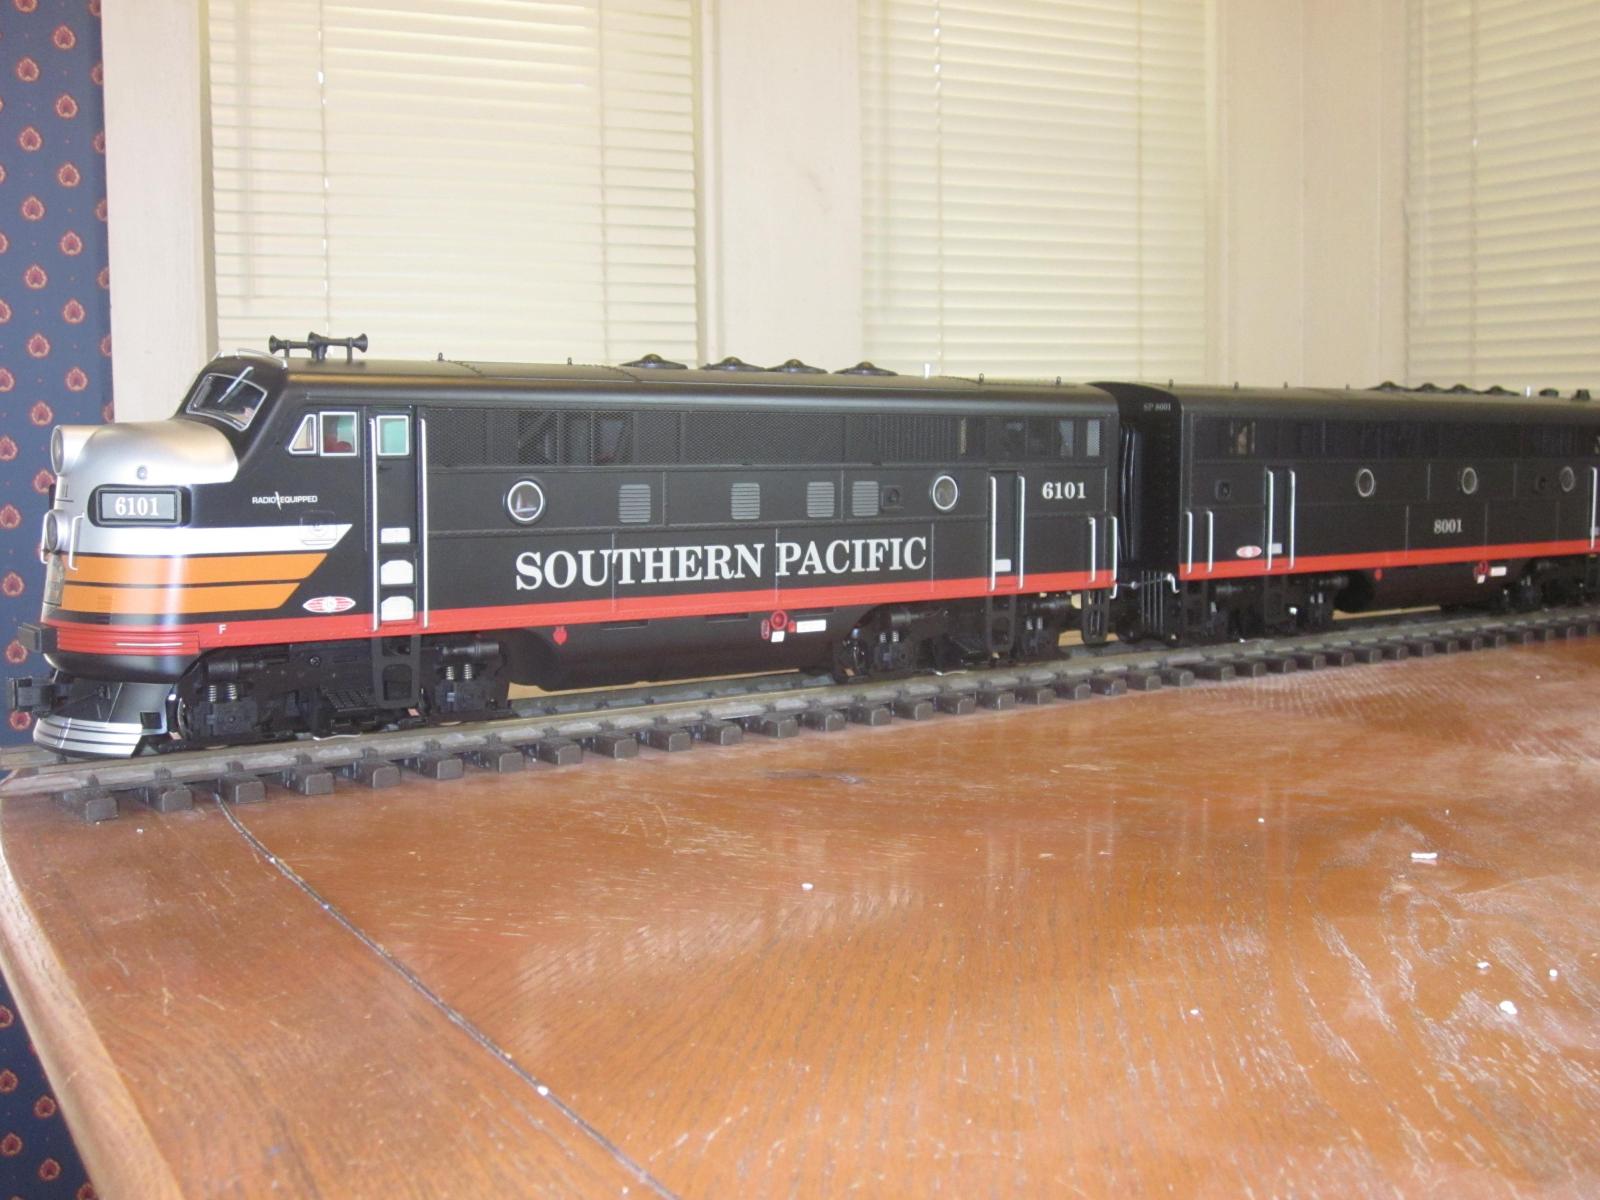 R22261 Southern Pacific (series 2)%20#6101 8001